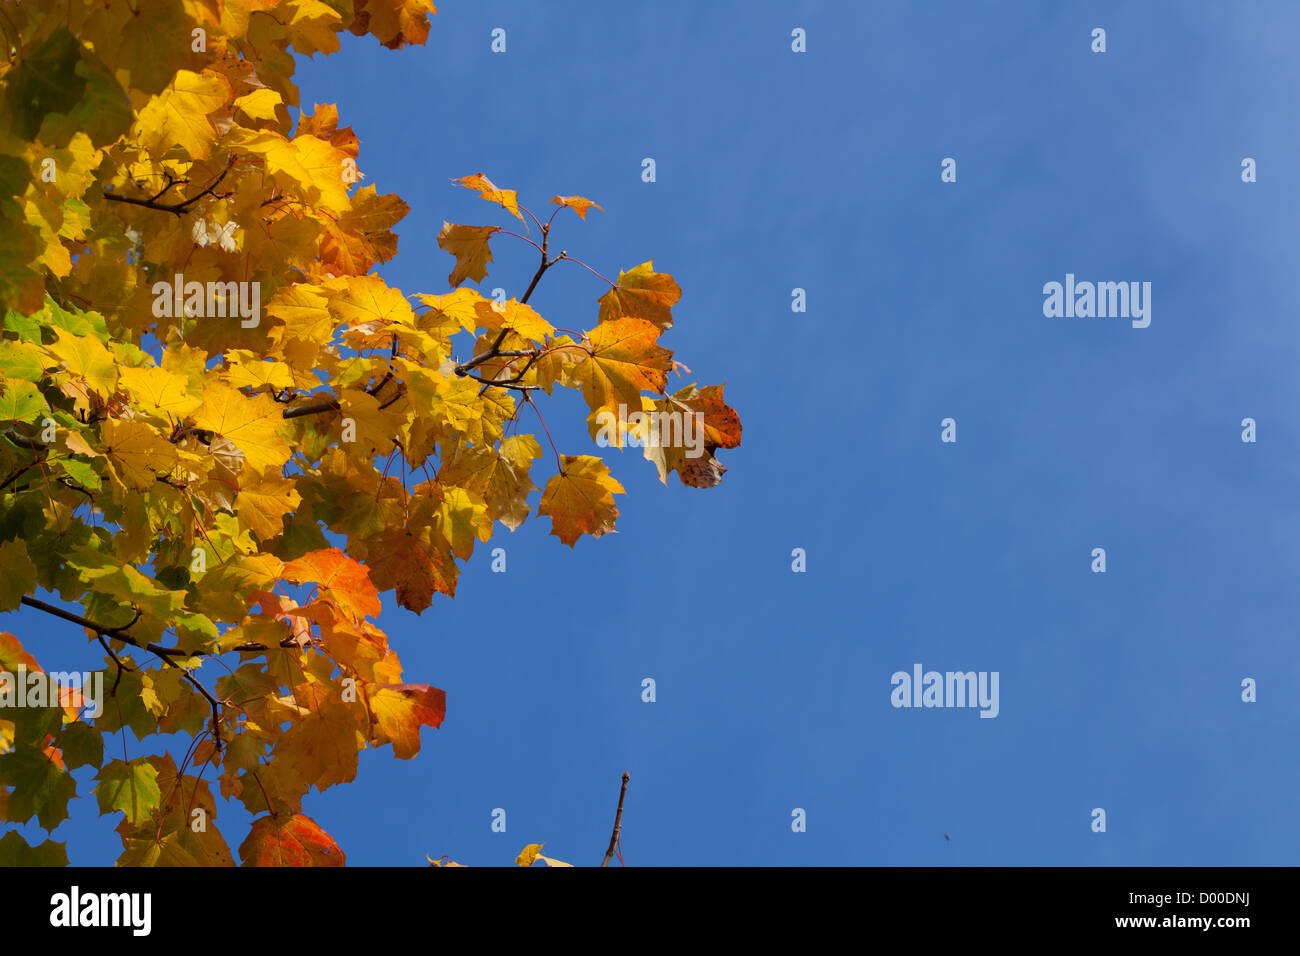 gmlh2010 5557 acer pseudoplatanus golden Sycamore leaves in autumn sunshine Stock Photo